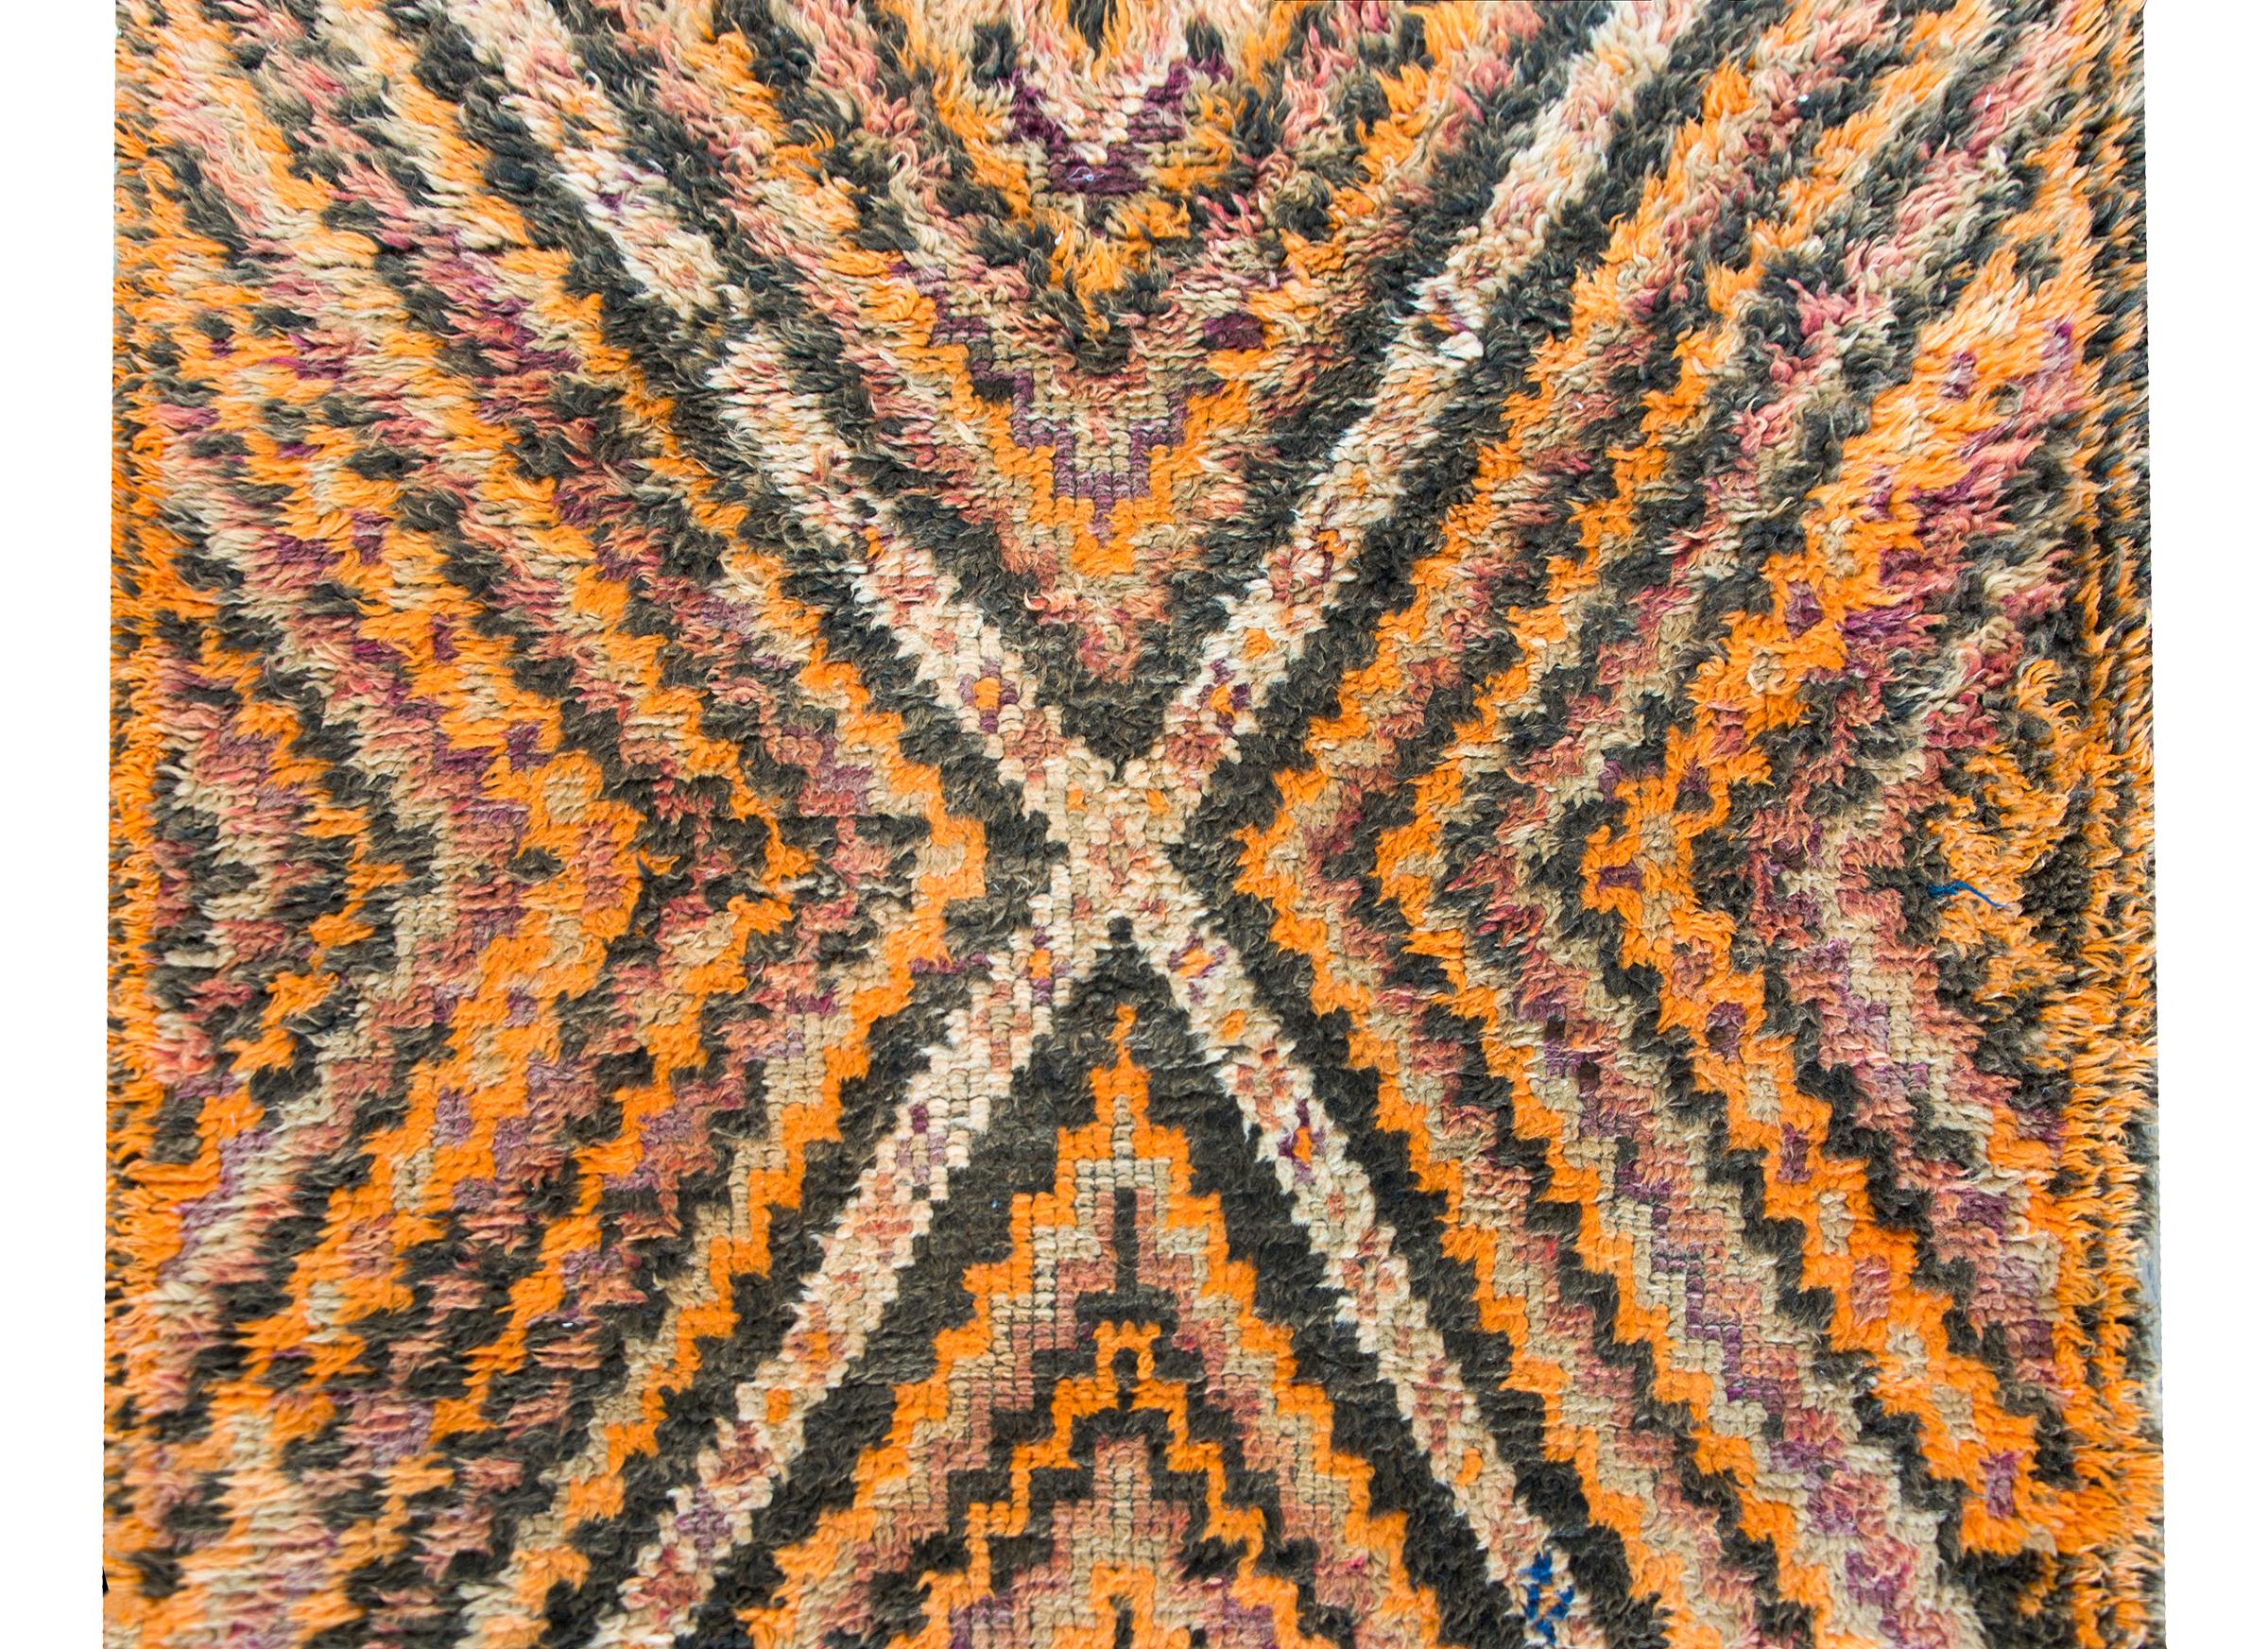 A wonderful mid-20th century Moroccan rug with an all-over zigzag pattern created from alternating black, orange, violet, and cream colored stripes creating a large diamond on one end.